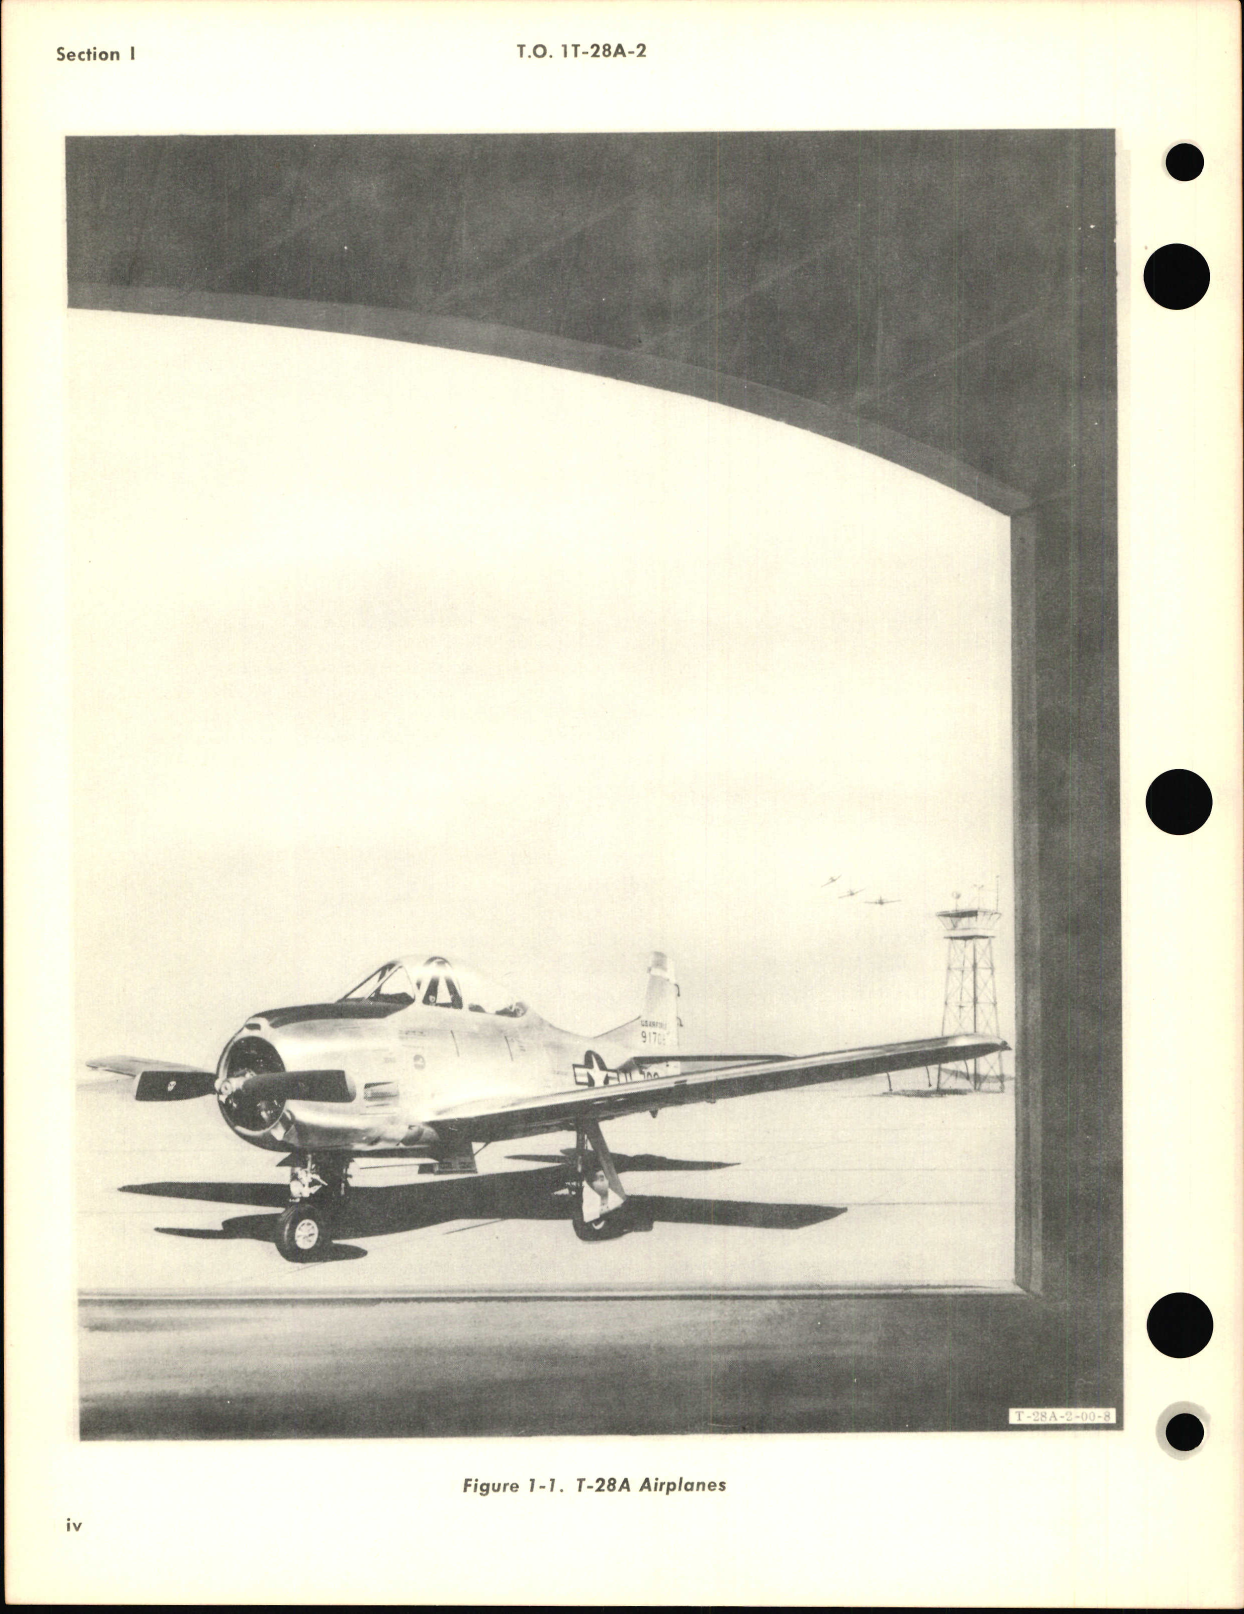 Sample page 8 from AirCorps Library document: Maintenance Manual for T-28A and T-28D